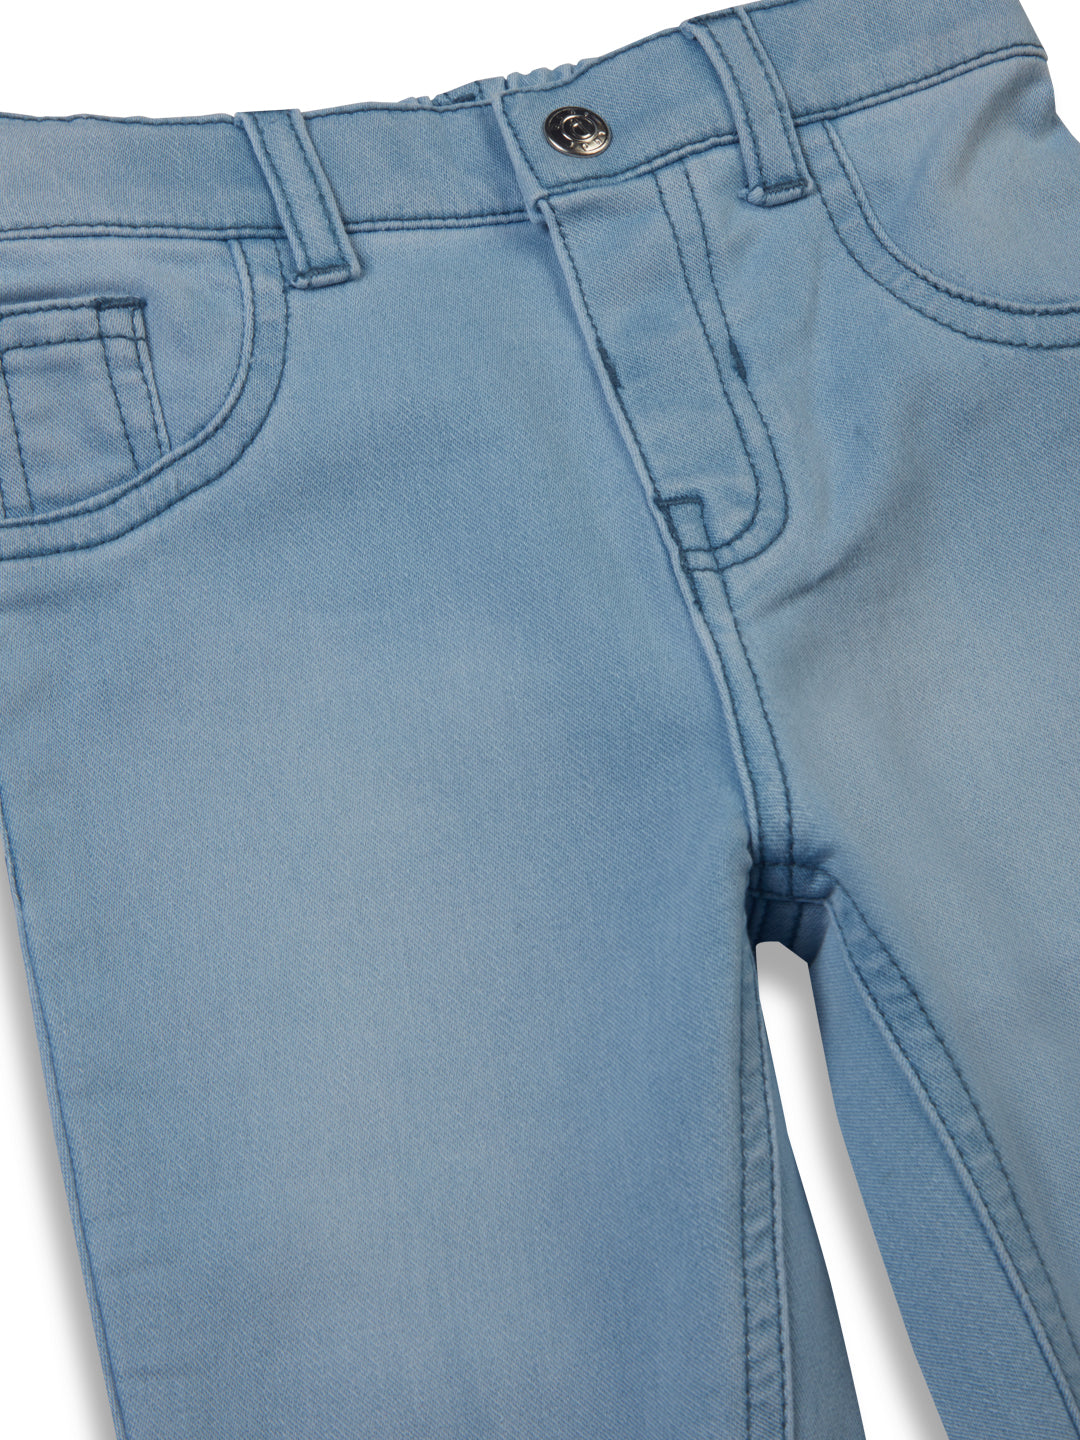 Baby Boys woven blue jeans pants